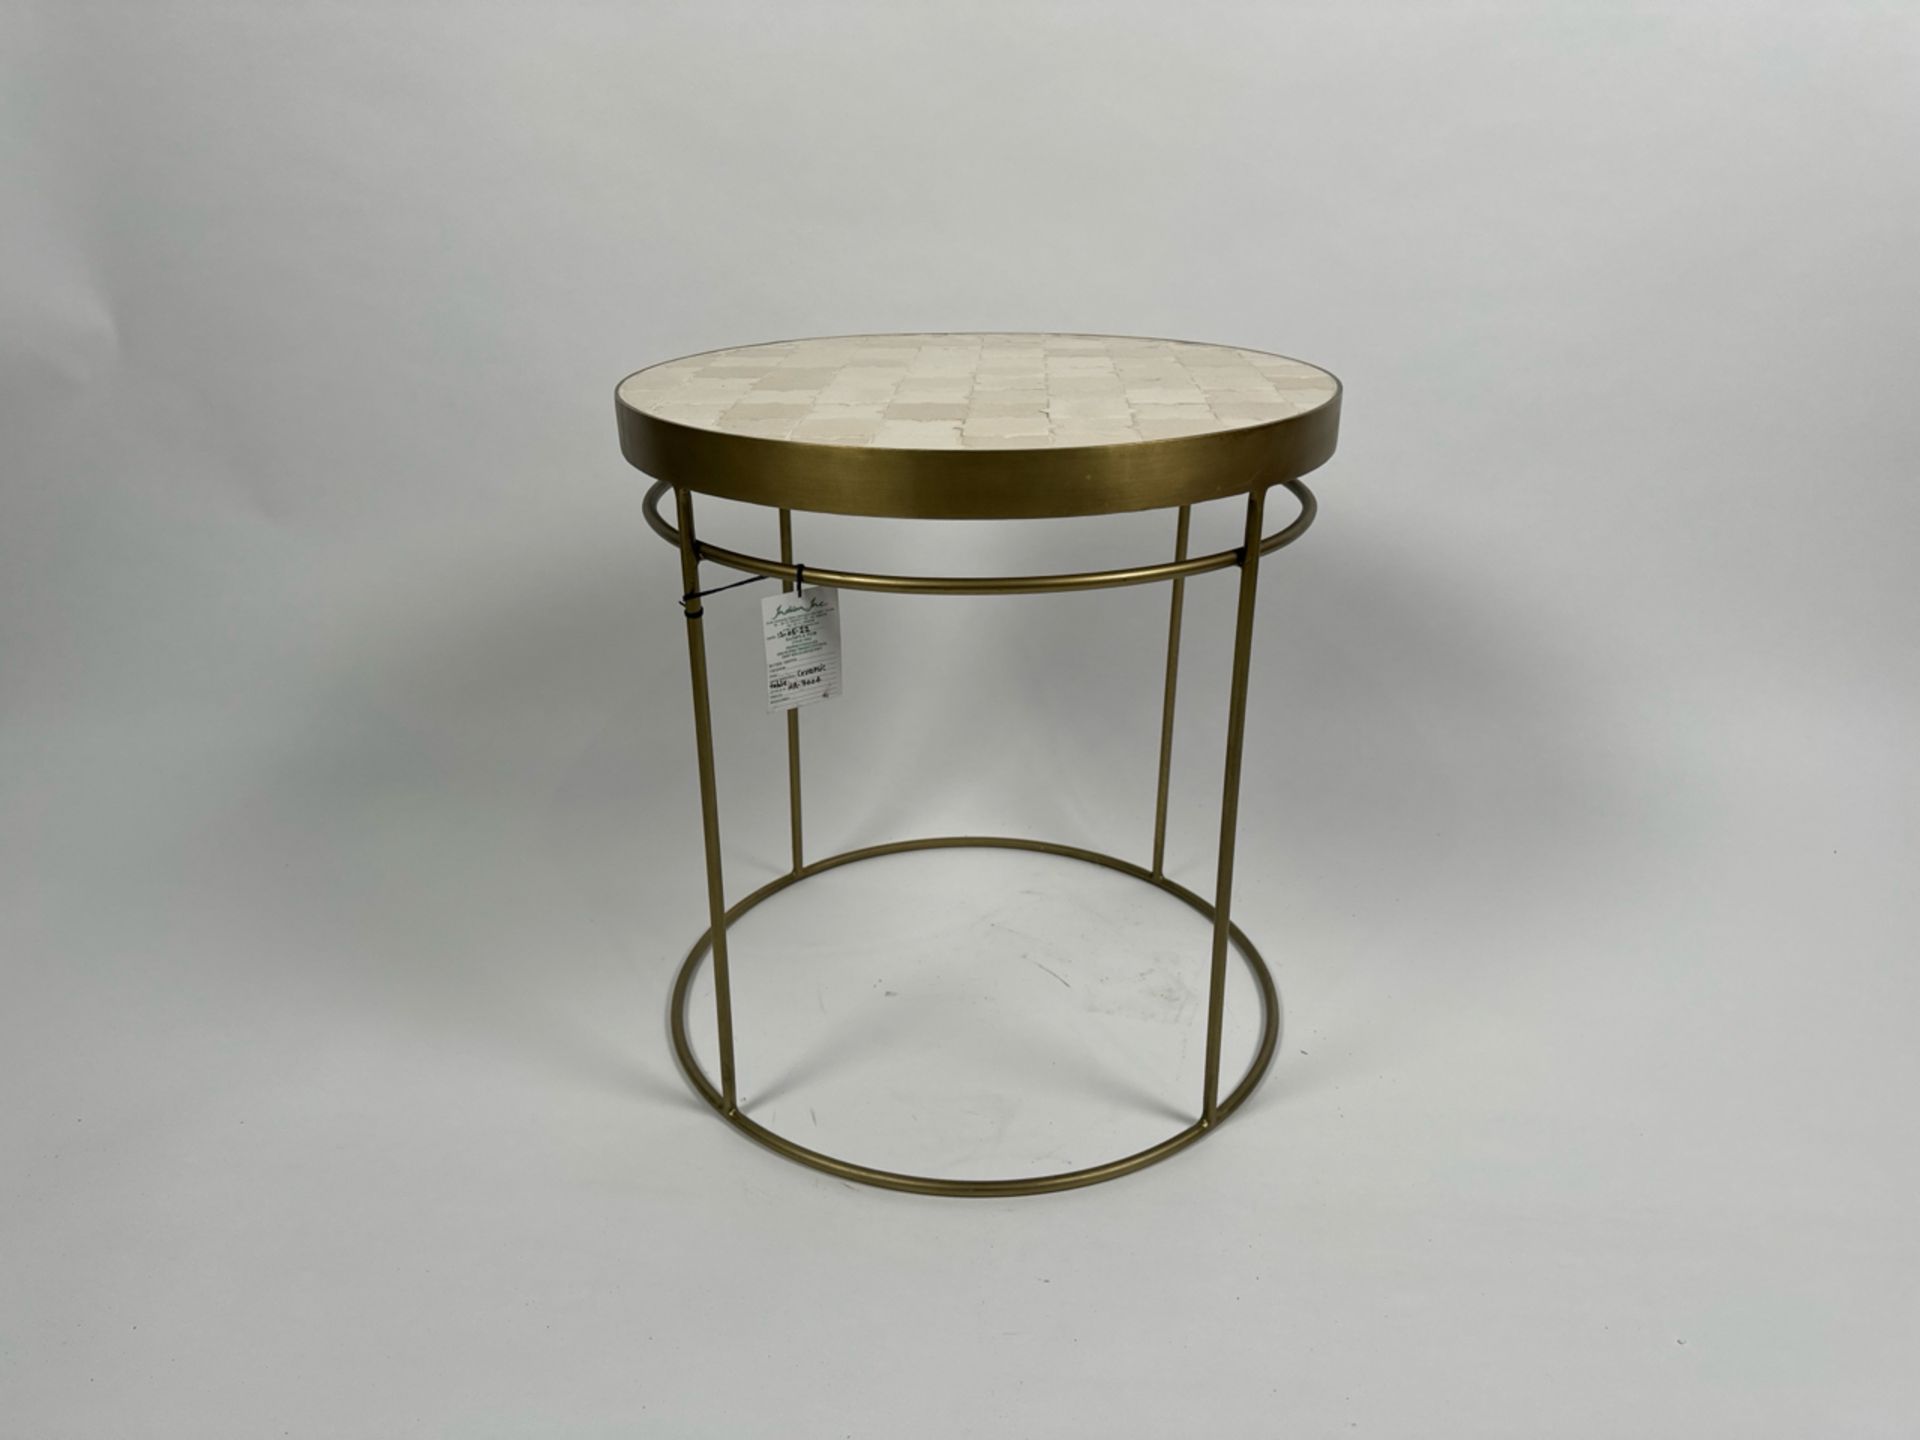 Ceramic Patterned Side Table - Image 2 of 3